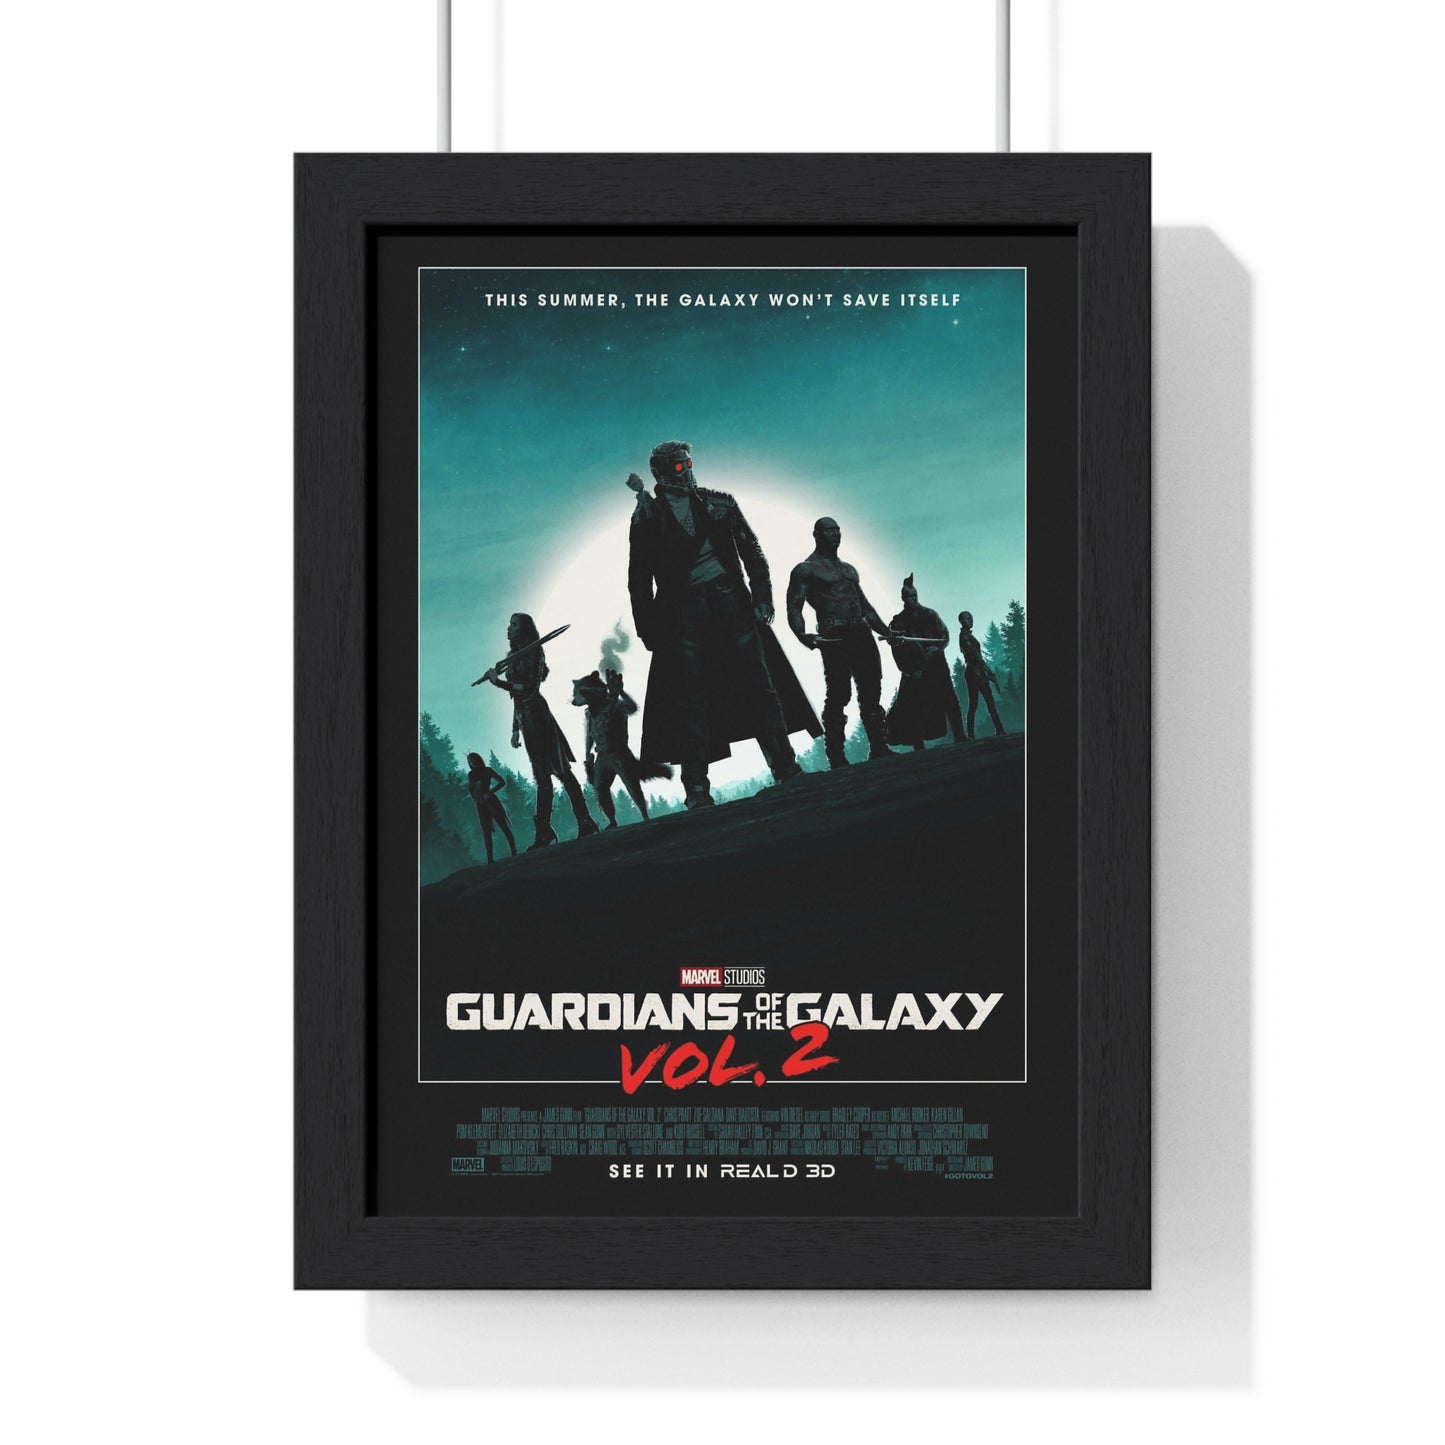 Guardians of the Galaxy Vol 1 & 2 art posters